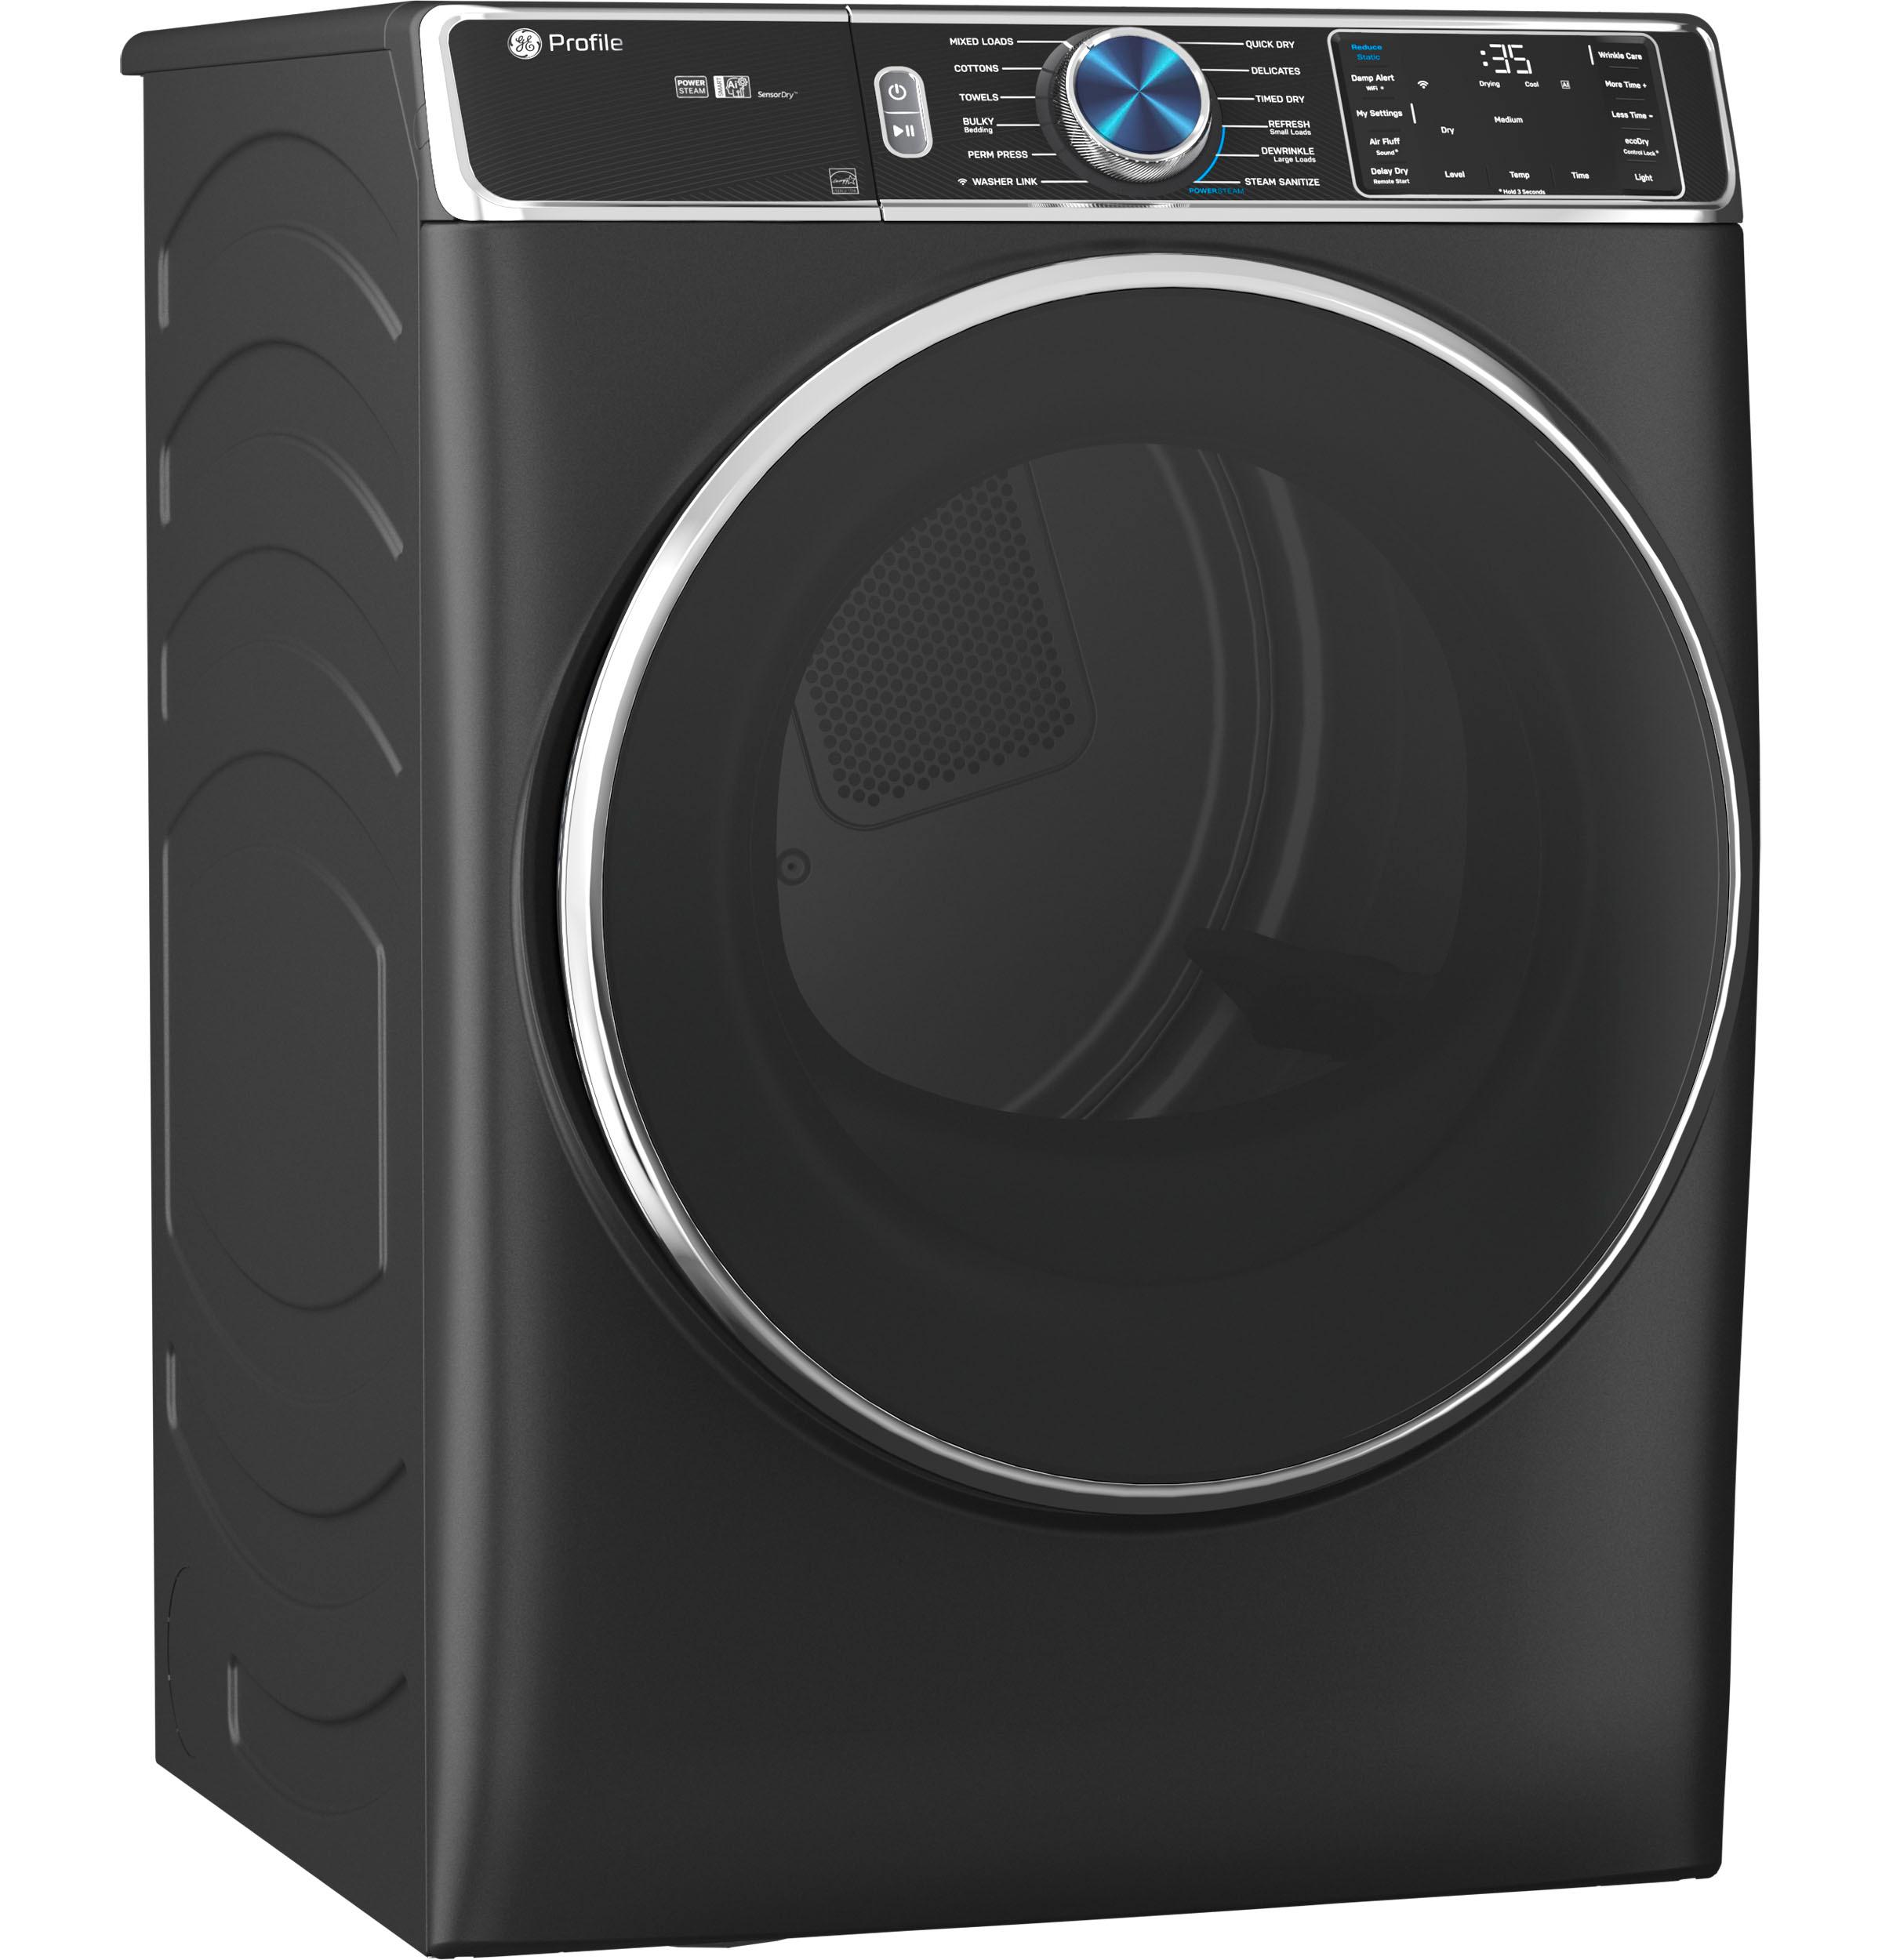 GE Profile™ ENERGY STAR® 7.8 cu. ft. Capacity Smart Front Load Electric Dryer with Steam and Sanitize Cycle